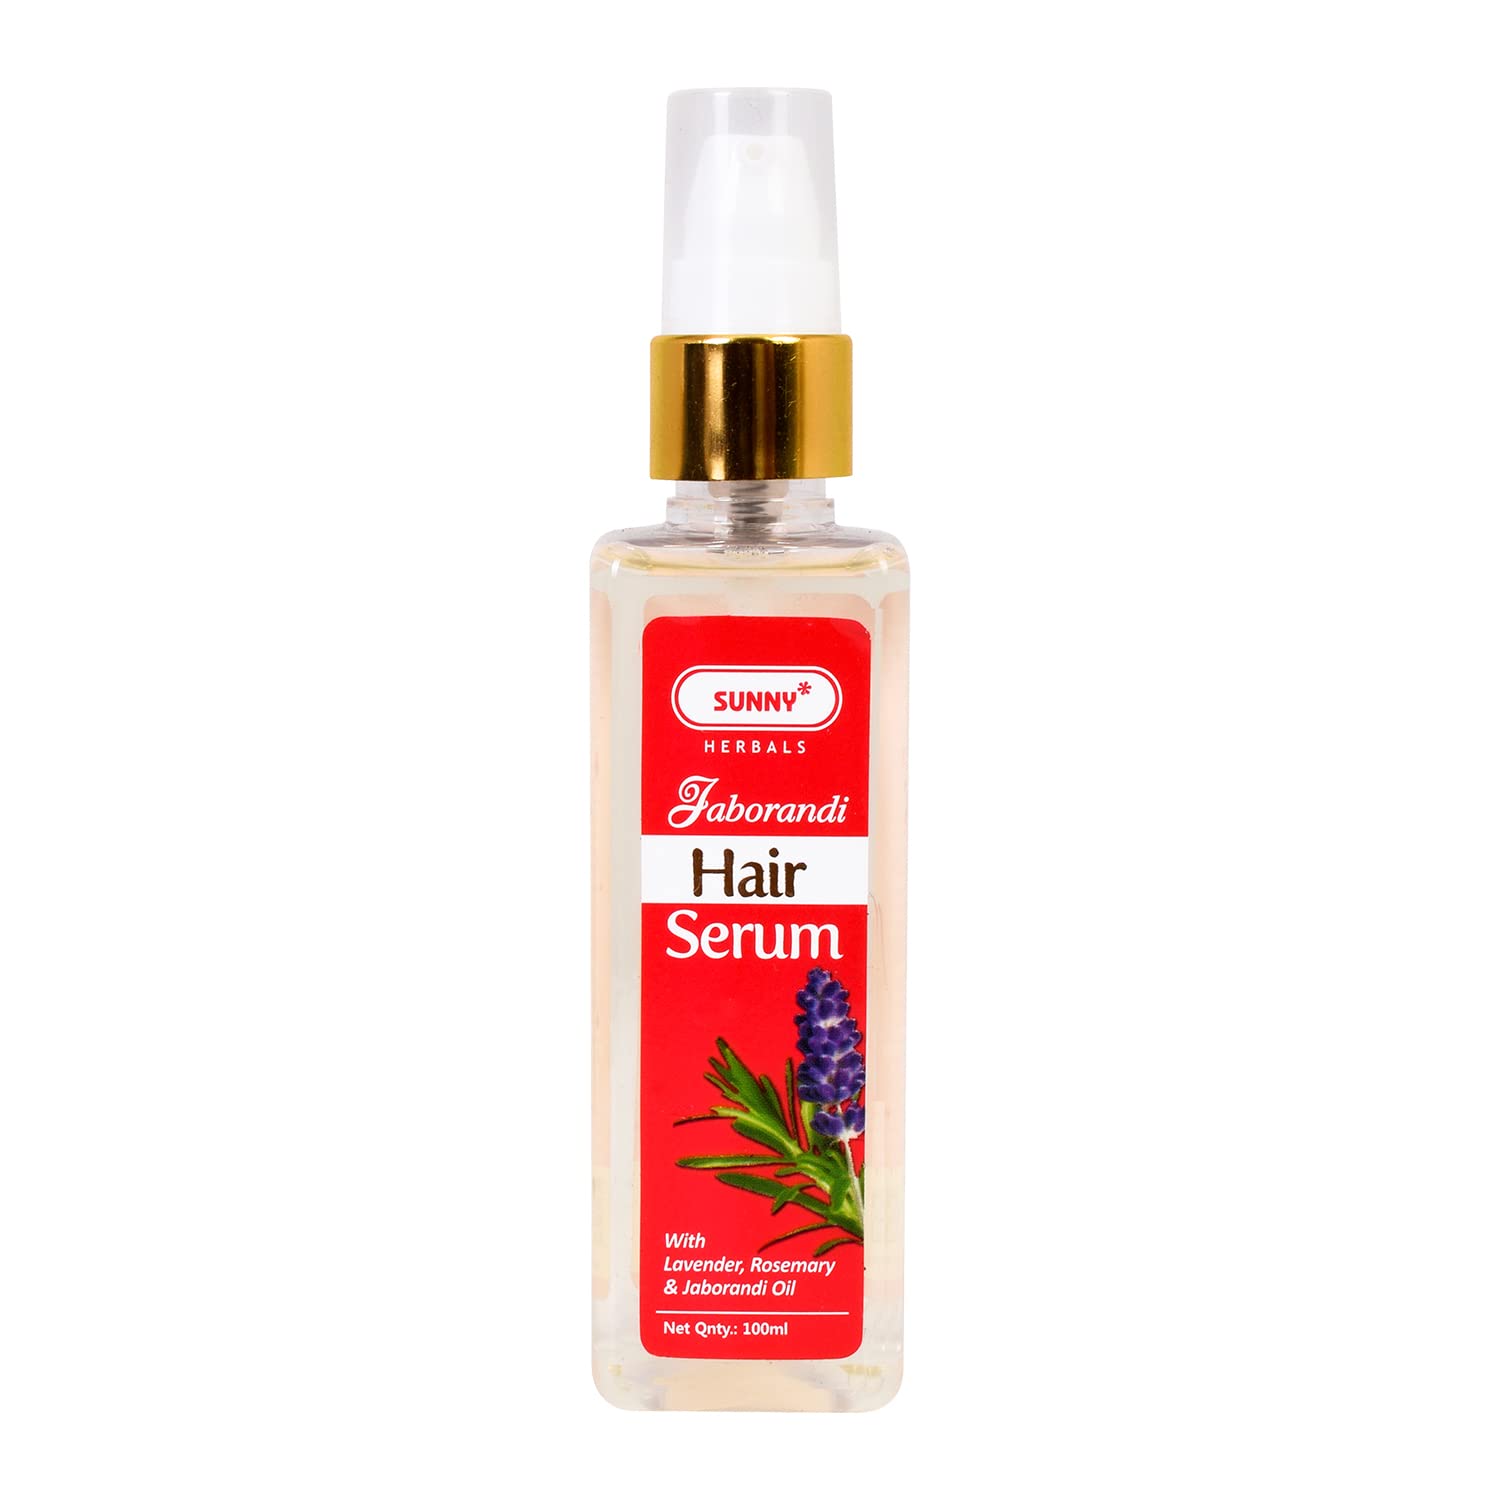 Sunny Hair Serum Enriched With Jaborandi & Basil & Essential Oils To Prevent Hair Loss, Promotes Ful Excellent Potion To Nourish Hair 100ml(Pack of 1)